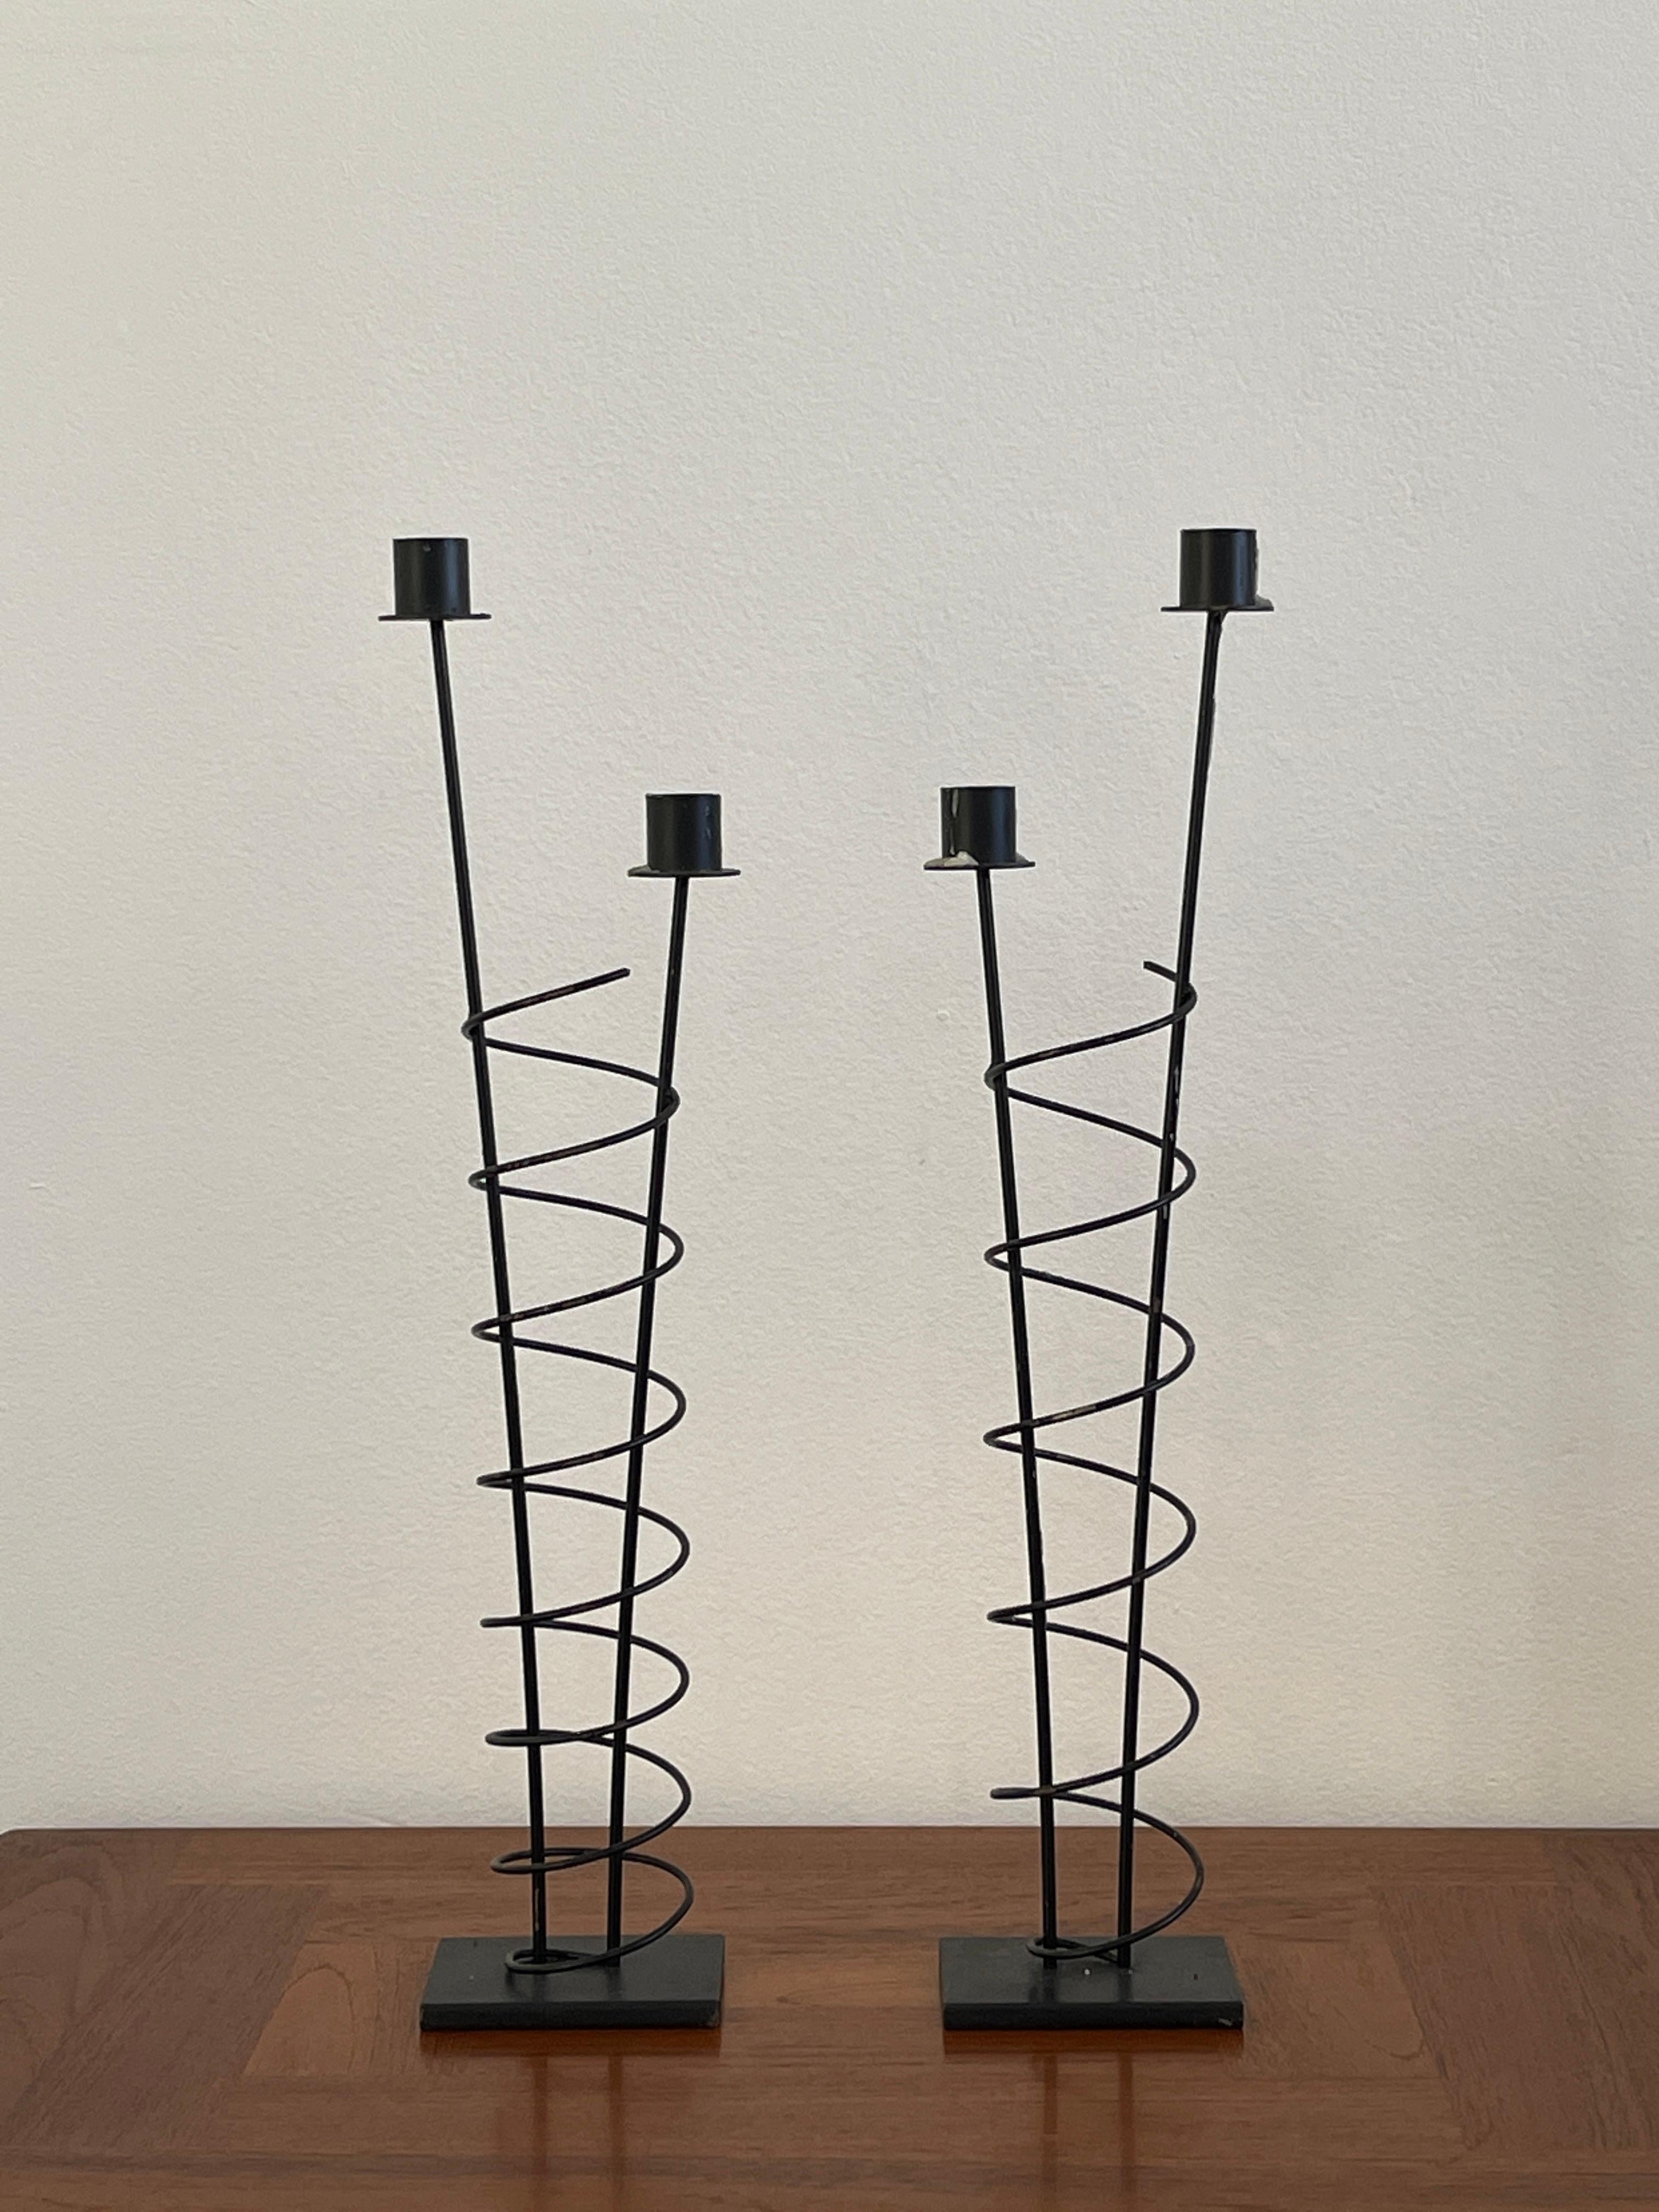 Late 20th Century Rick Martin Metal candlestick holders from the post modern time period. Martin produced amazing Memphis Design Sculptures, Clocks, Candle Holders and Wall Sculptures.

This set is wrought iron and the composition is spirals on